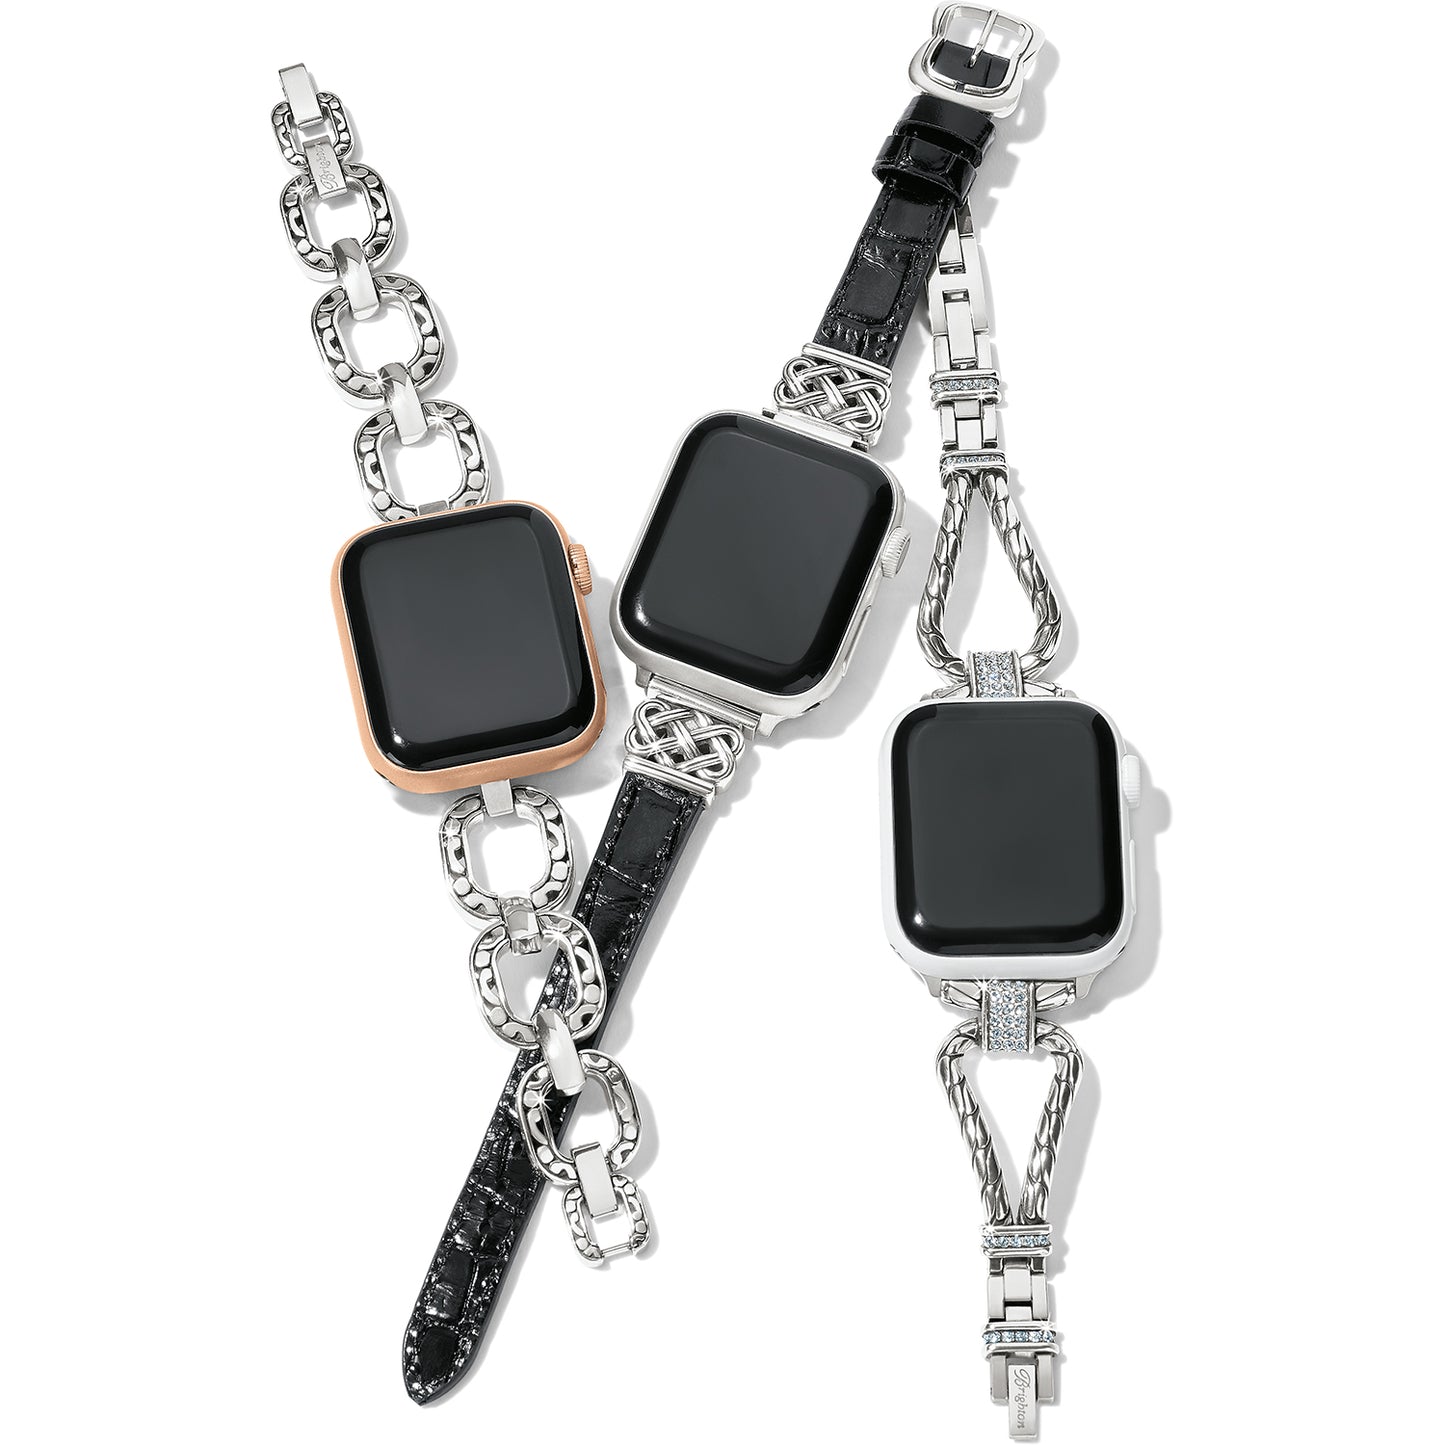 Contempo Linx Watch Band by Brighton created for your Smart Watch features the silver Contempo design with fold-over clasp, length: 6 1/4" - 7 1/4". Shop at The Painted Cottage in Edgewater, MD.